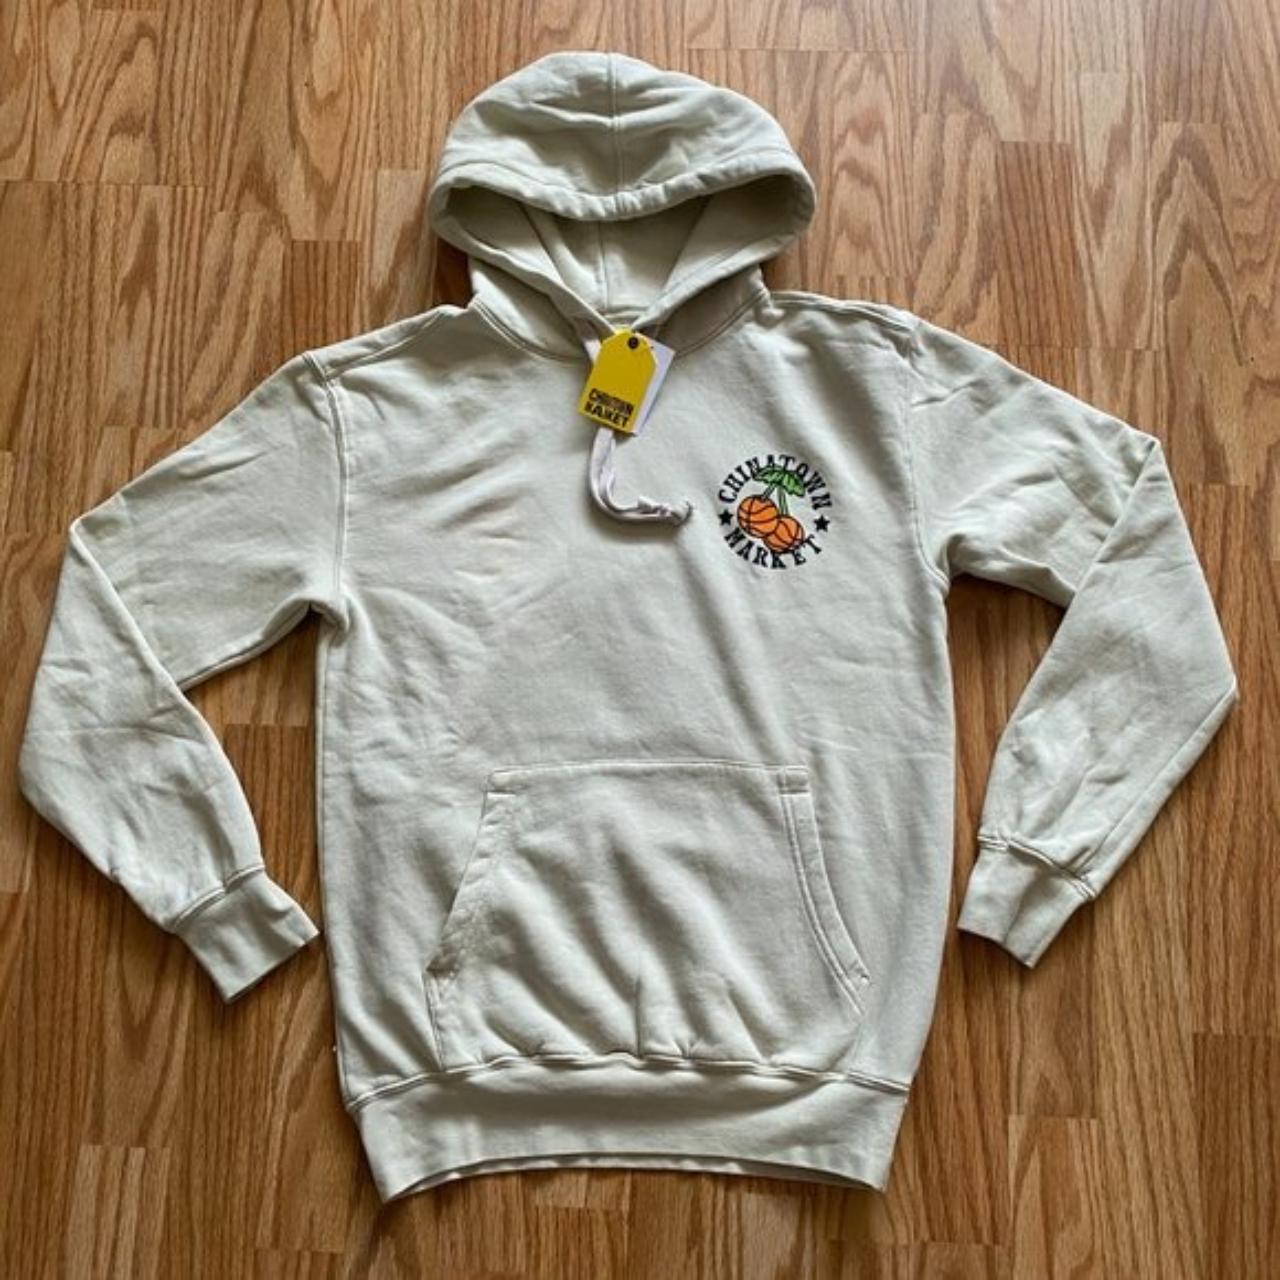 Chinatown market LV print hoodie Ordered wrong size - Depop